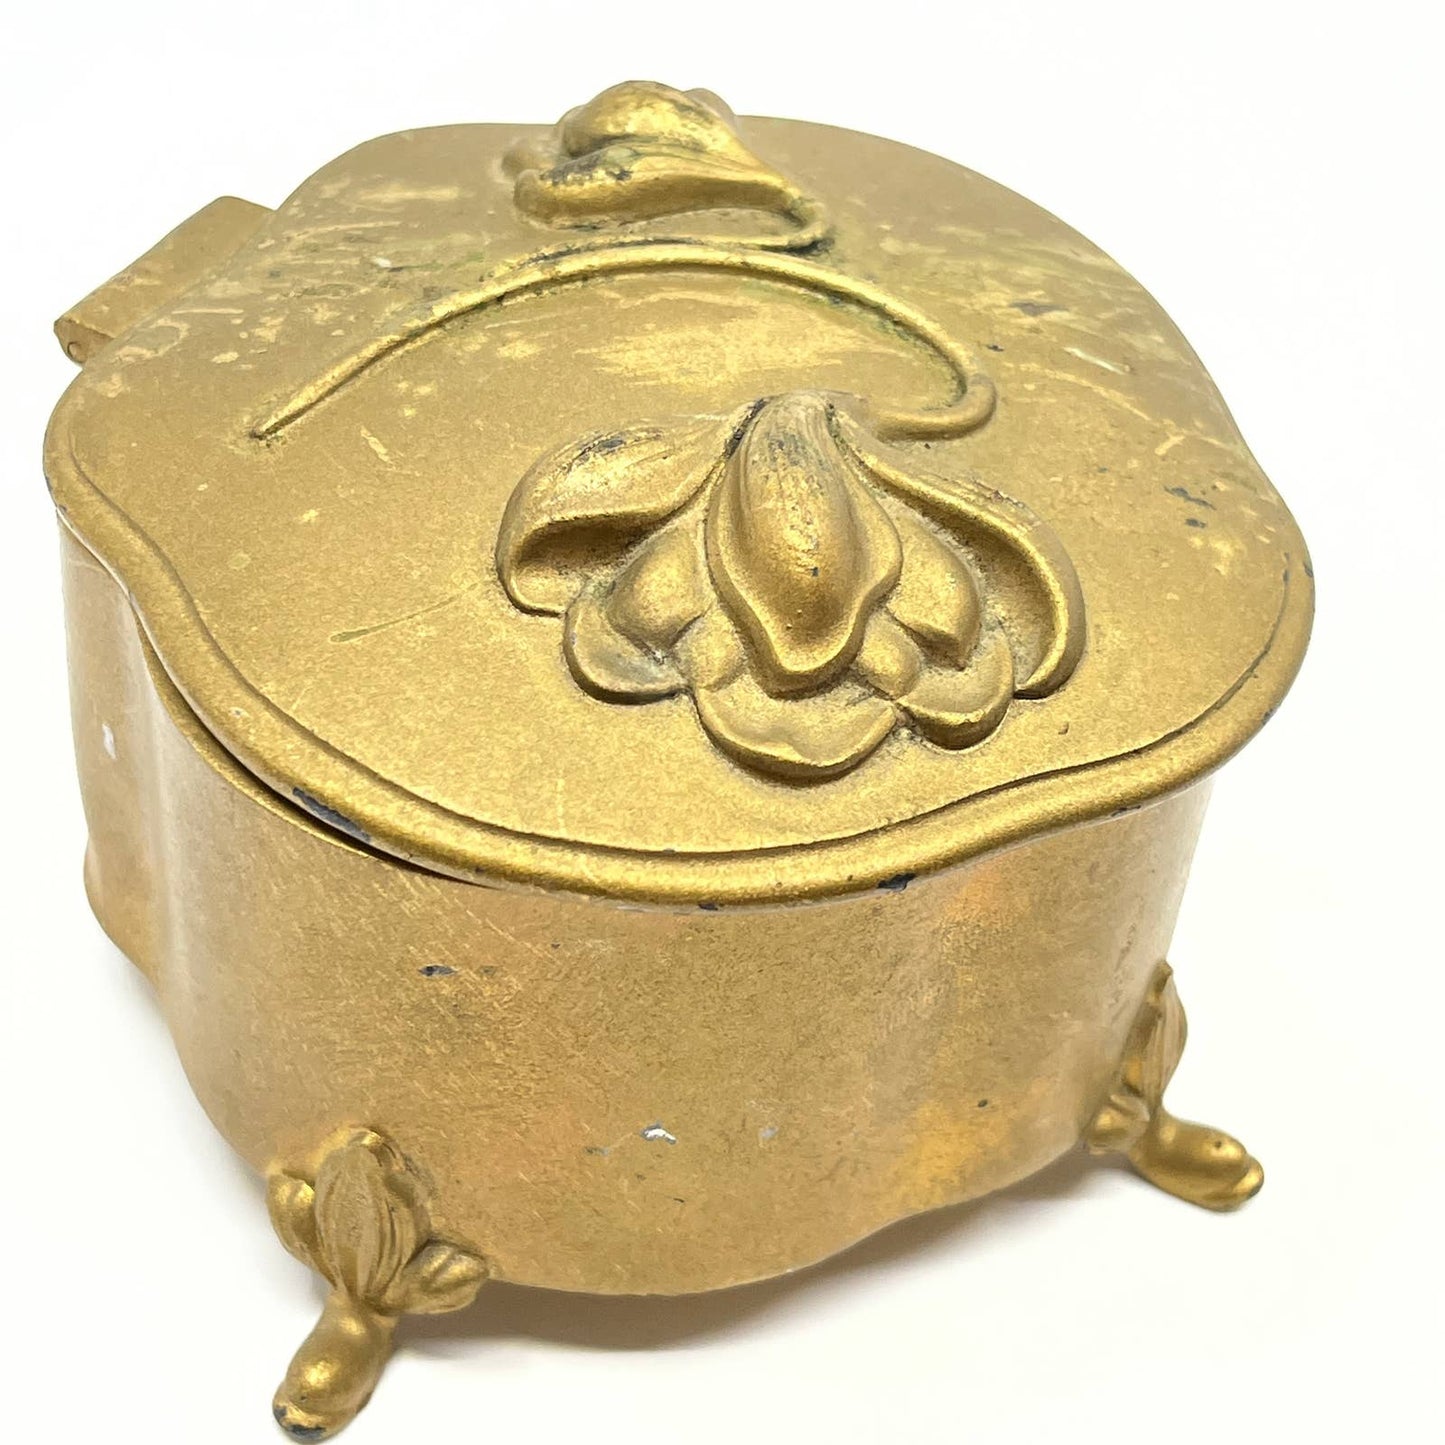 1904 Victor Gold Painted Silver Plate Footed Jewelry Trinket Box TF6